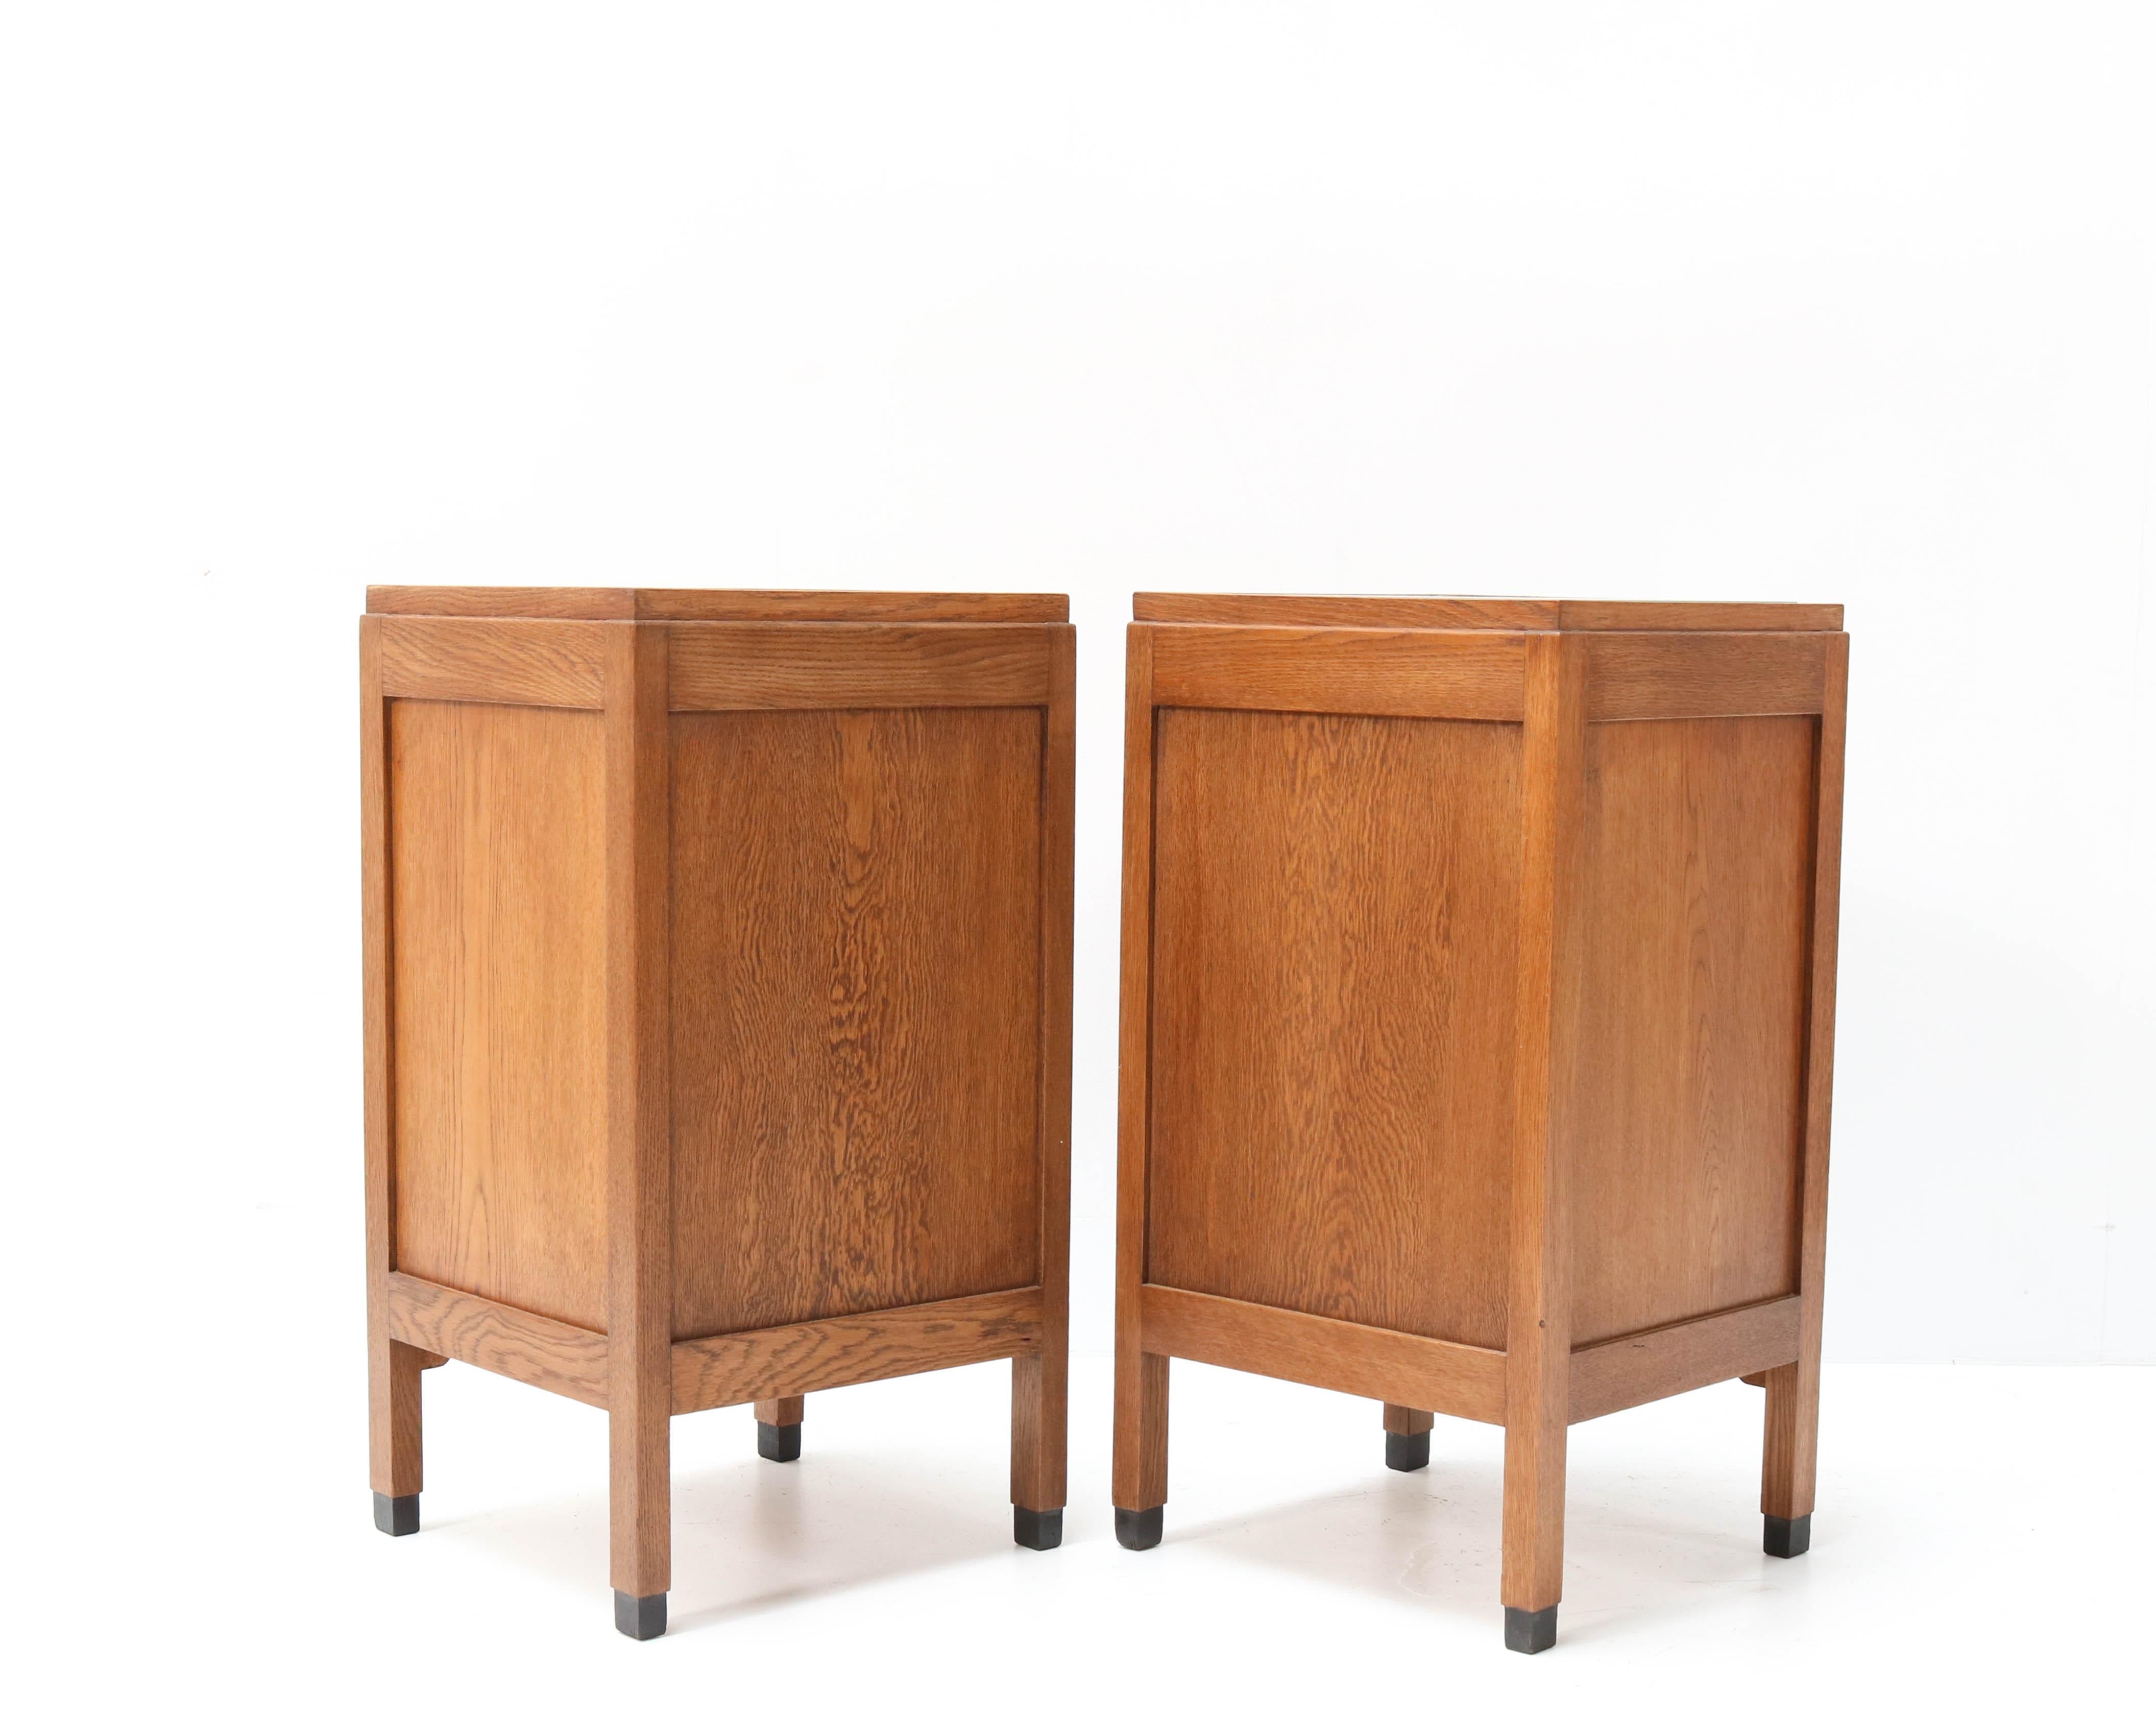 Two Oak Art Deco Amsterdam School Nightstand or Bedside Tables by Fa. Drilling 1